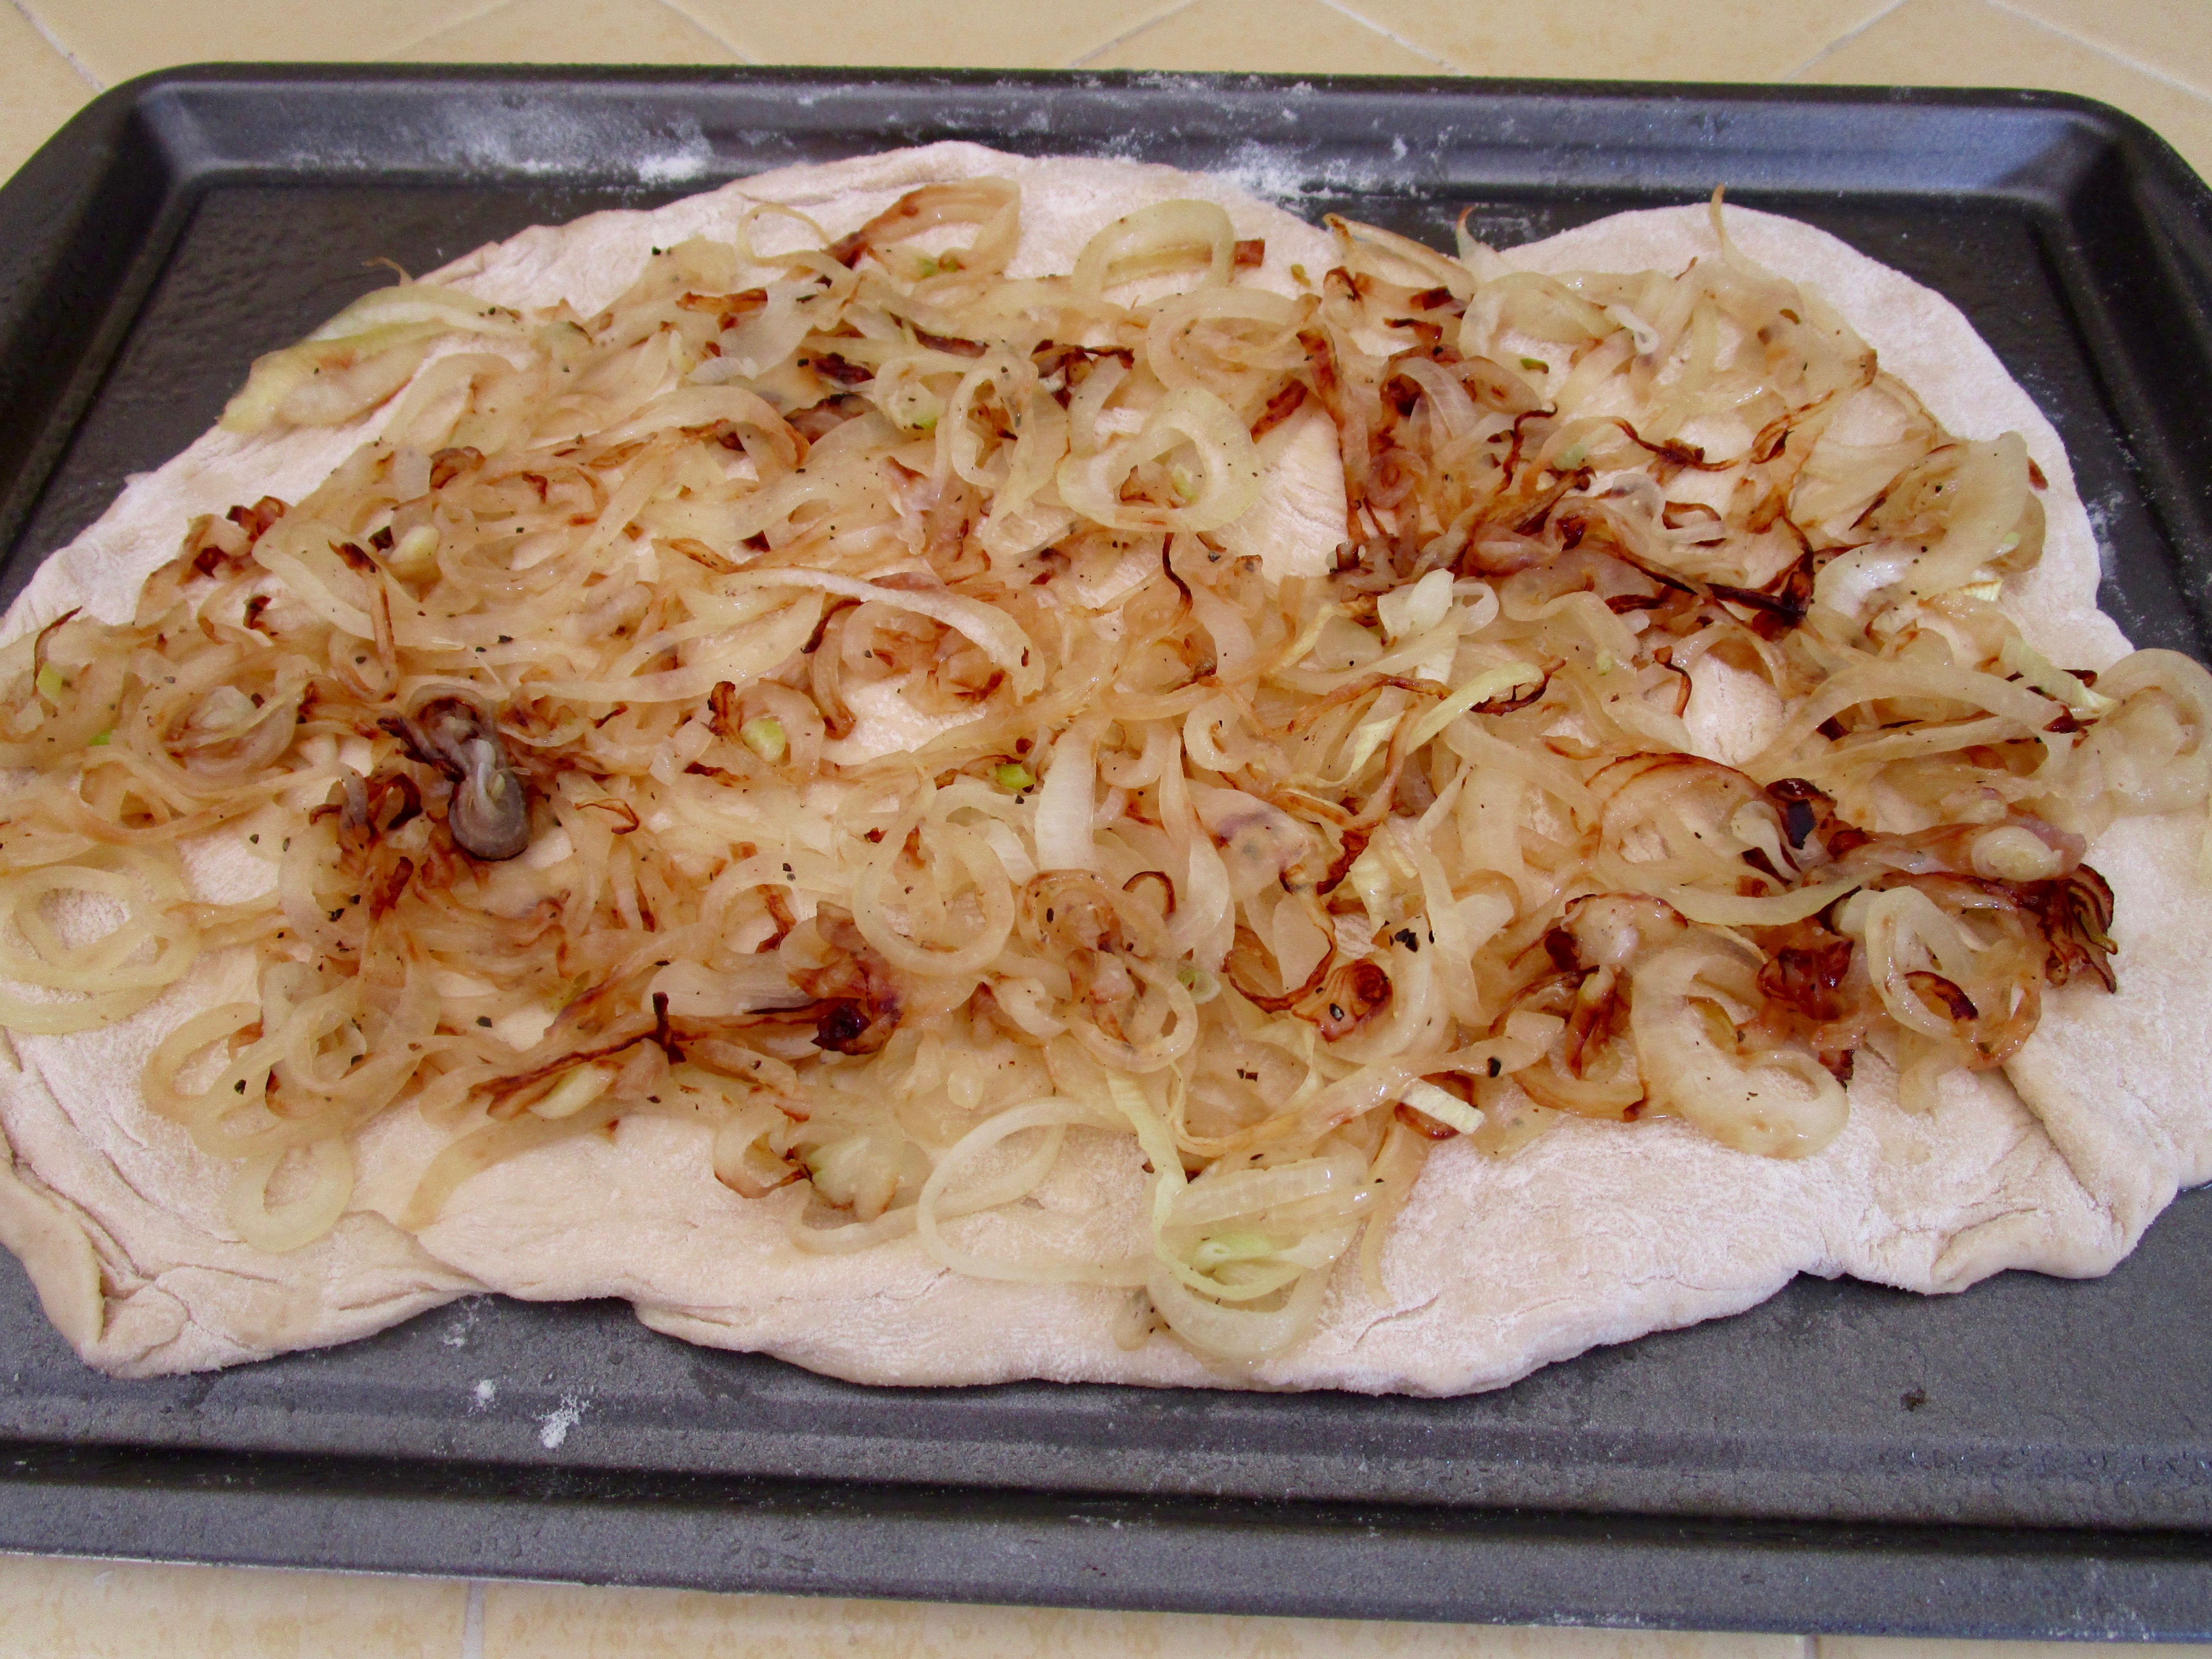 The softened, caramelized  sliced onions are this pizza's "sauce".